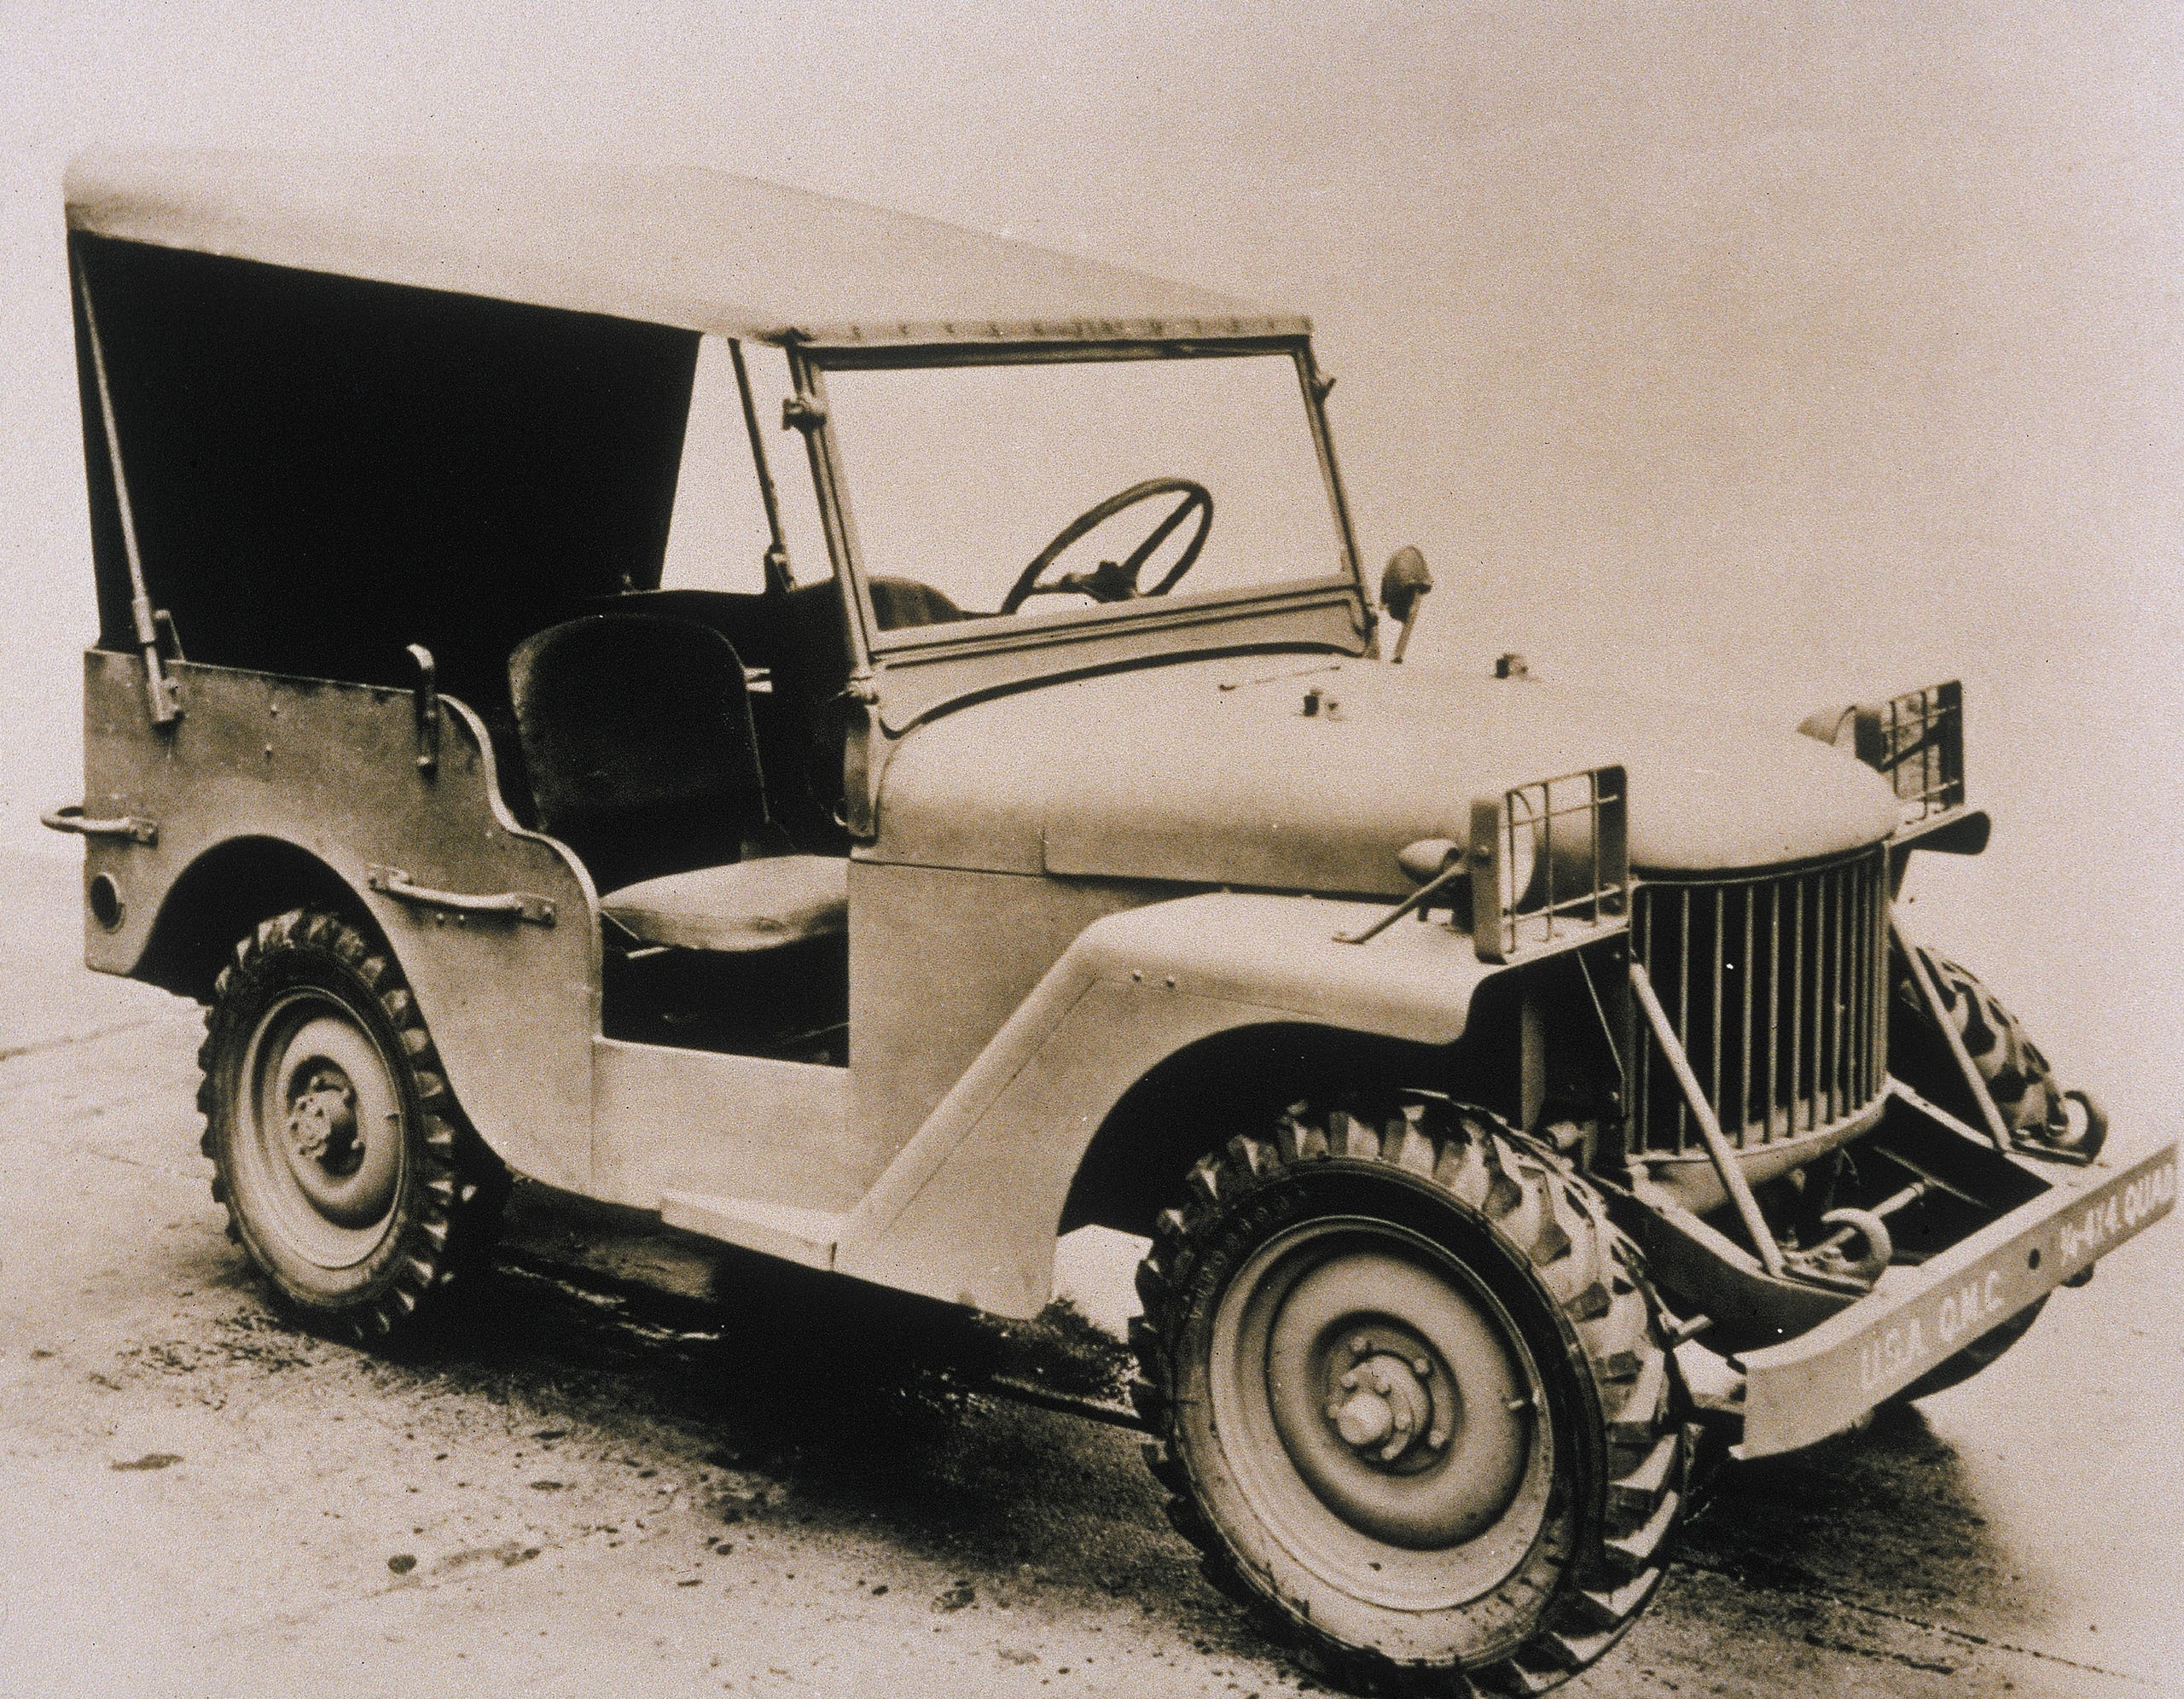 Willys-Overland was awarded the contract for its 1940 Willys Quad Original Pilot. Modifications were made to meet Army specifications and production began in 1941.